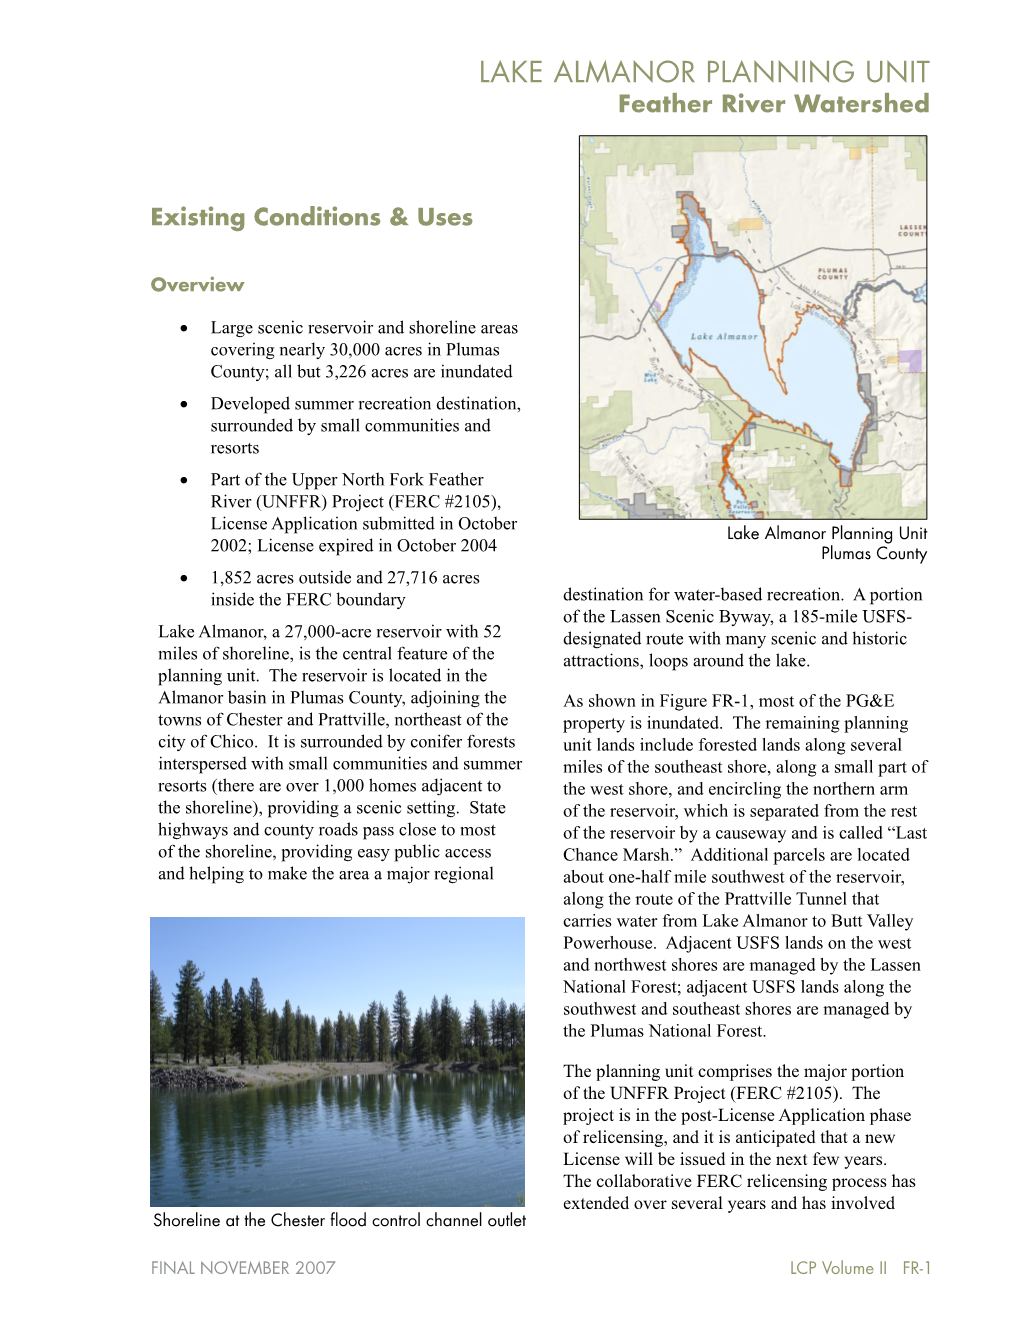 LAKE ALMANOR PLANNING UNIT Feather River Watershed